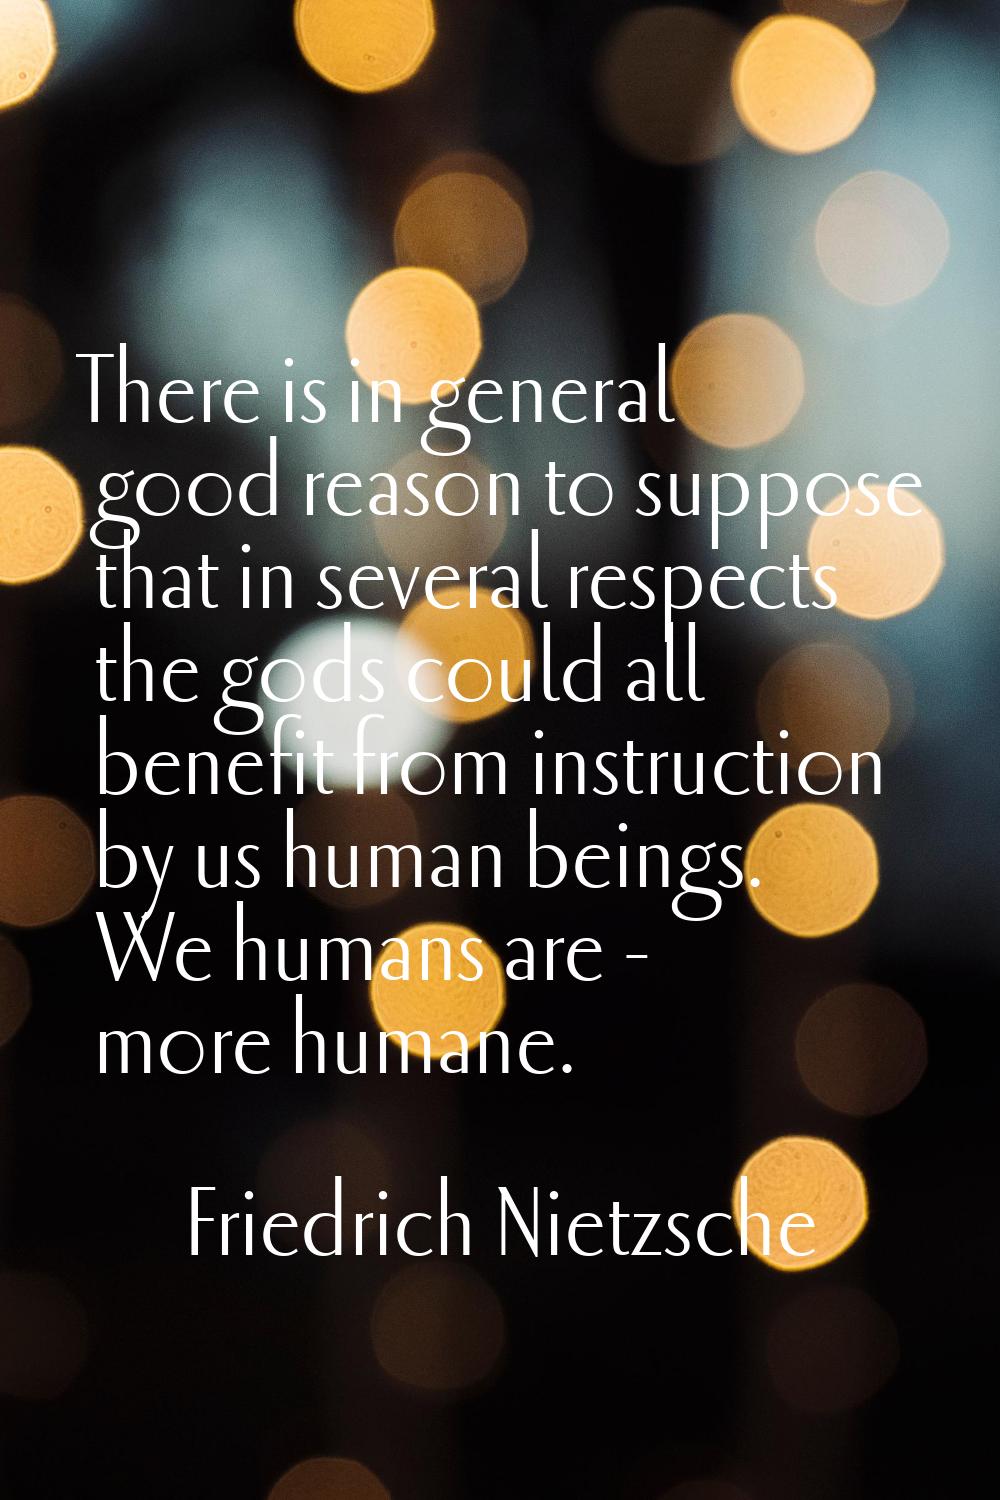 There is in general good reason to suppose that in several respects the gods could all benefit from